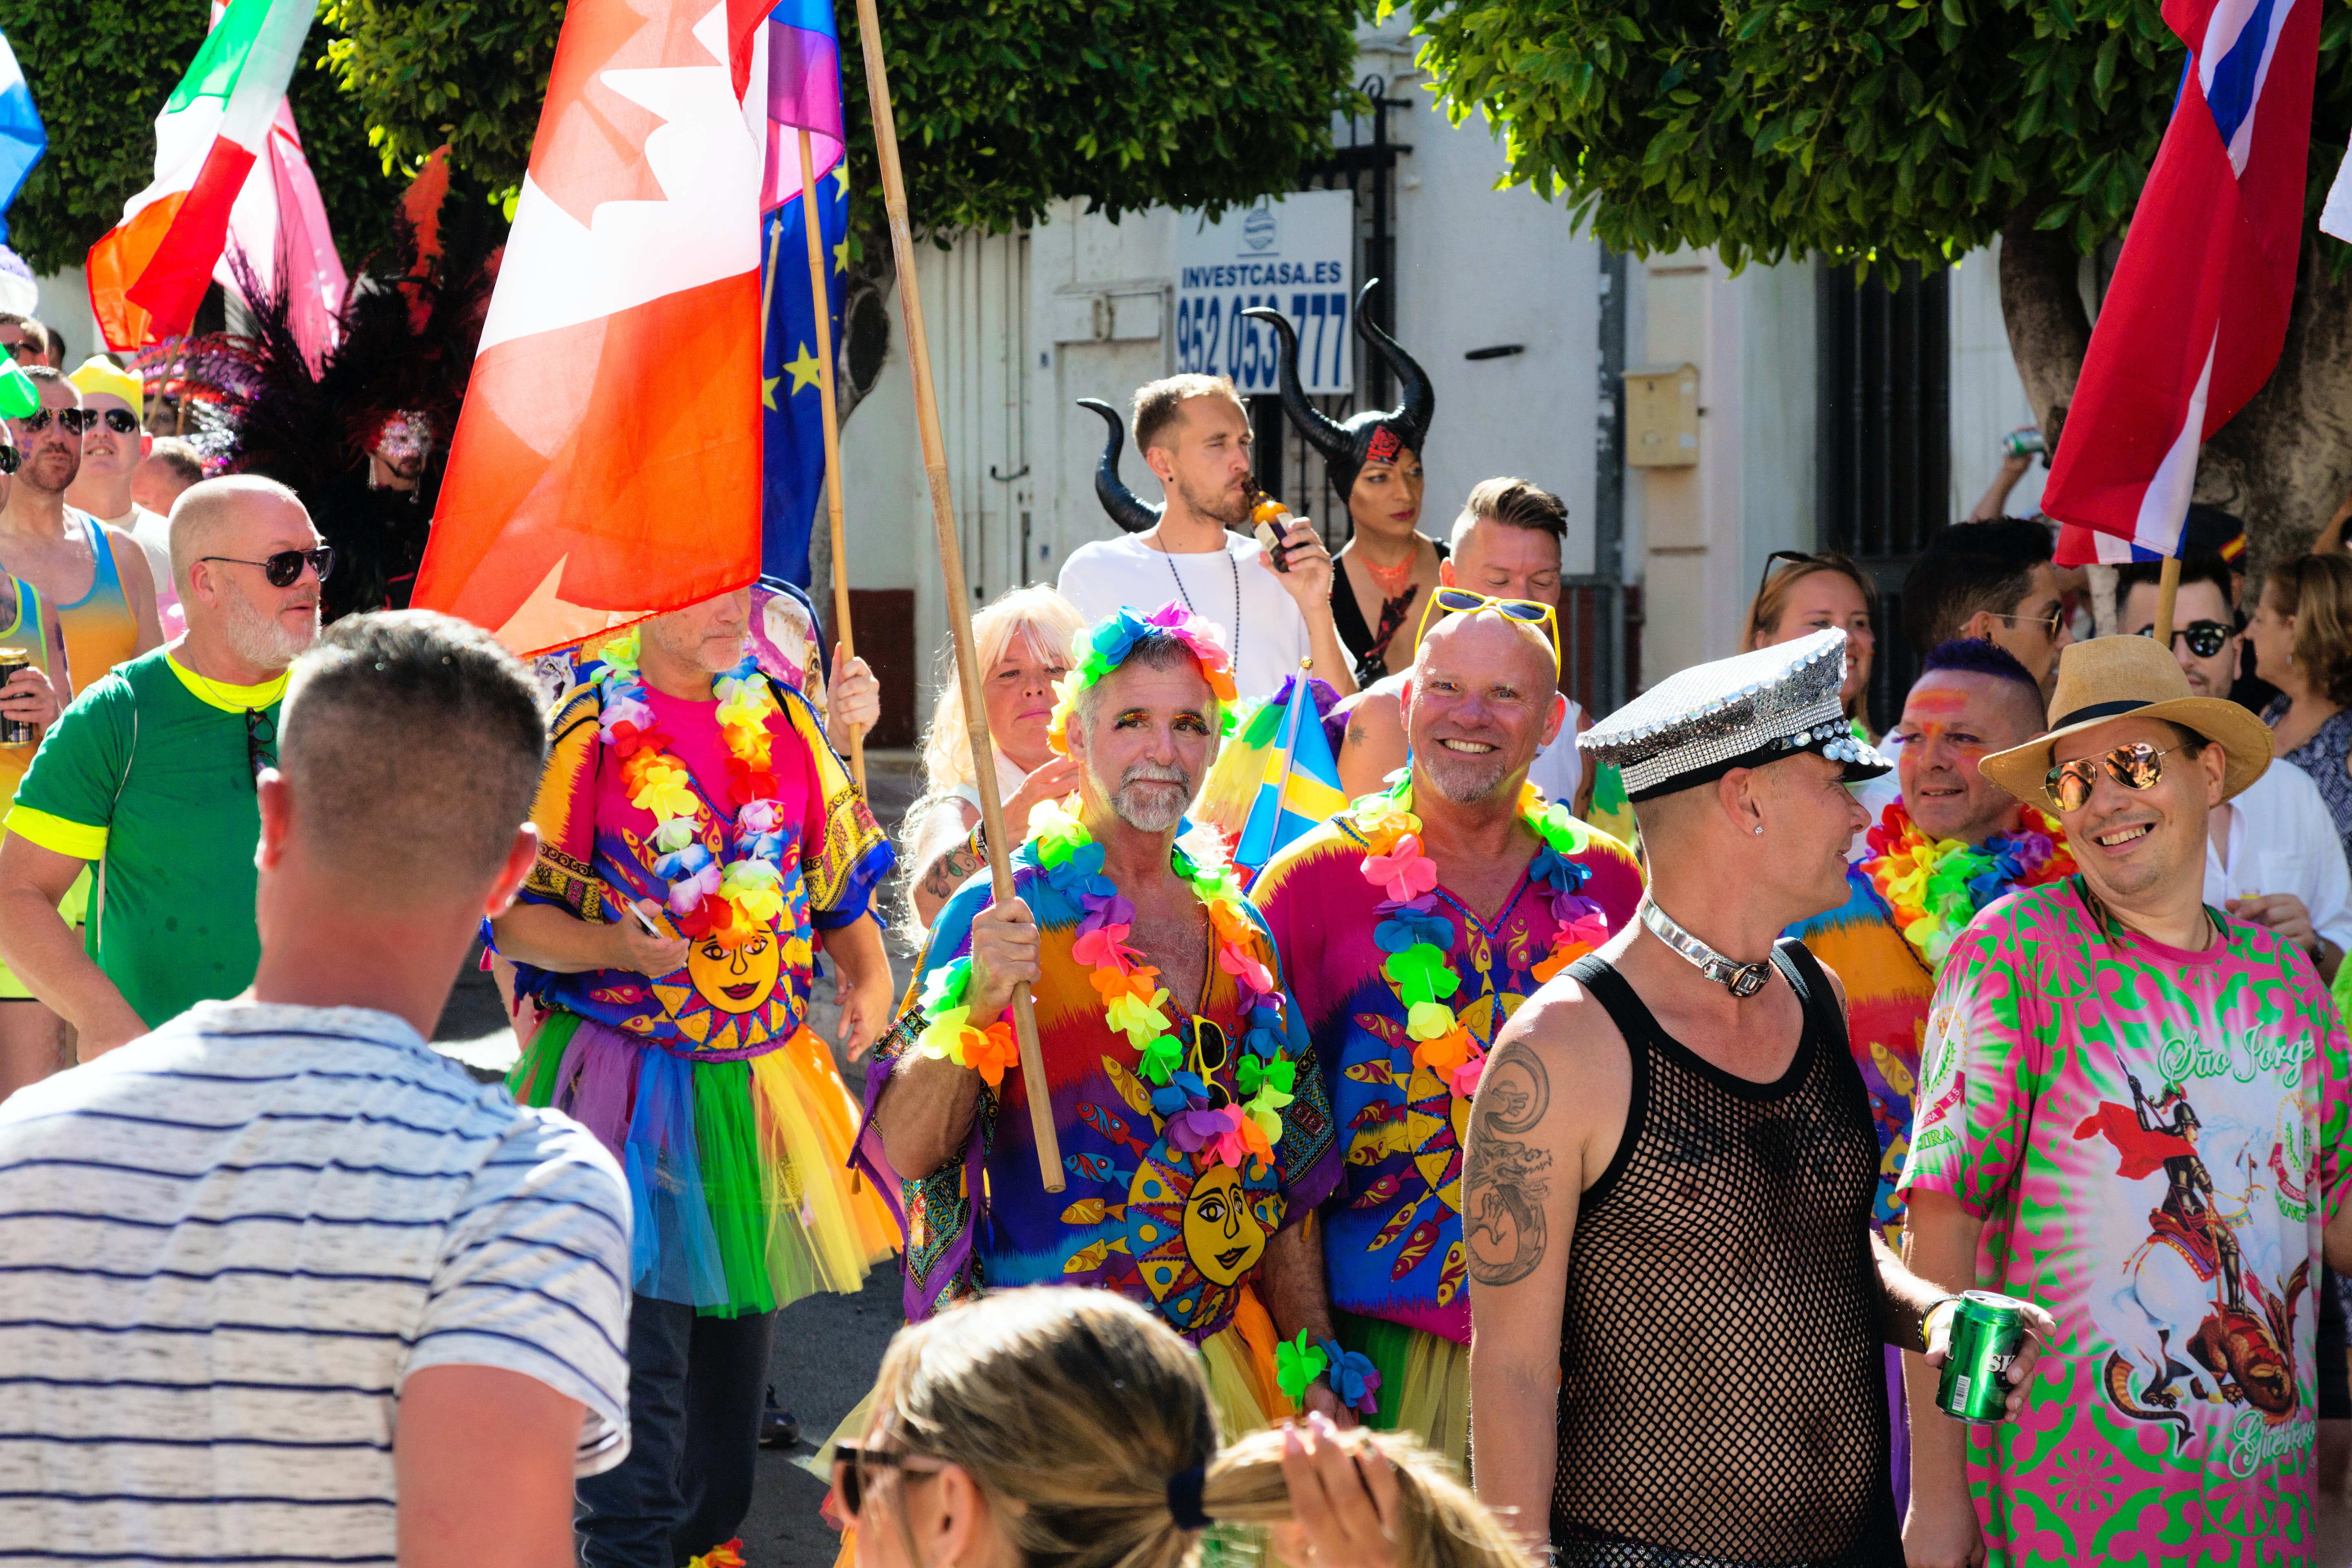 A pride march where there is a lot of people mainly older men wearing colorful outfits all smiling.